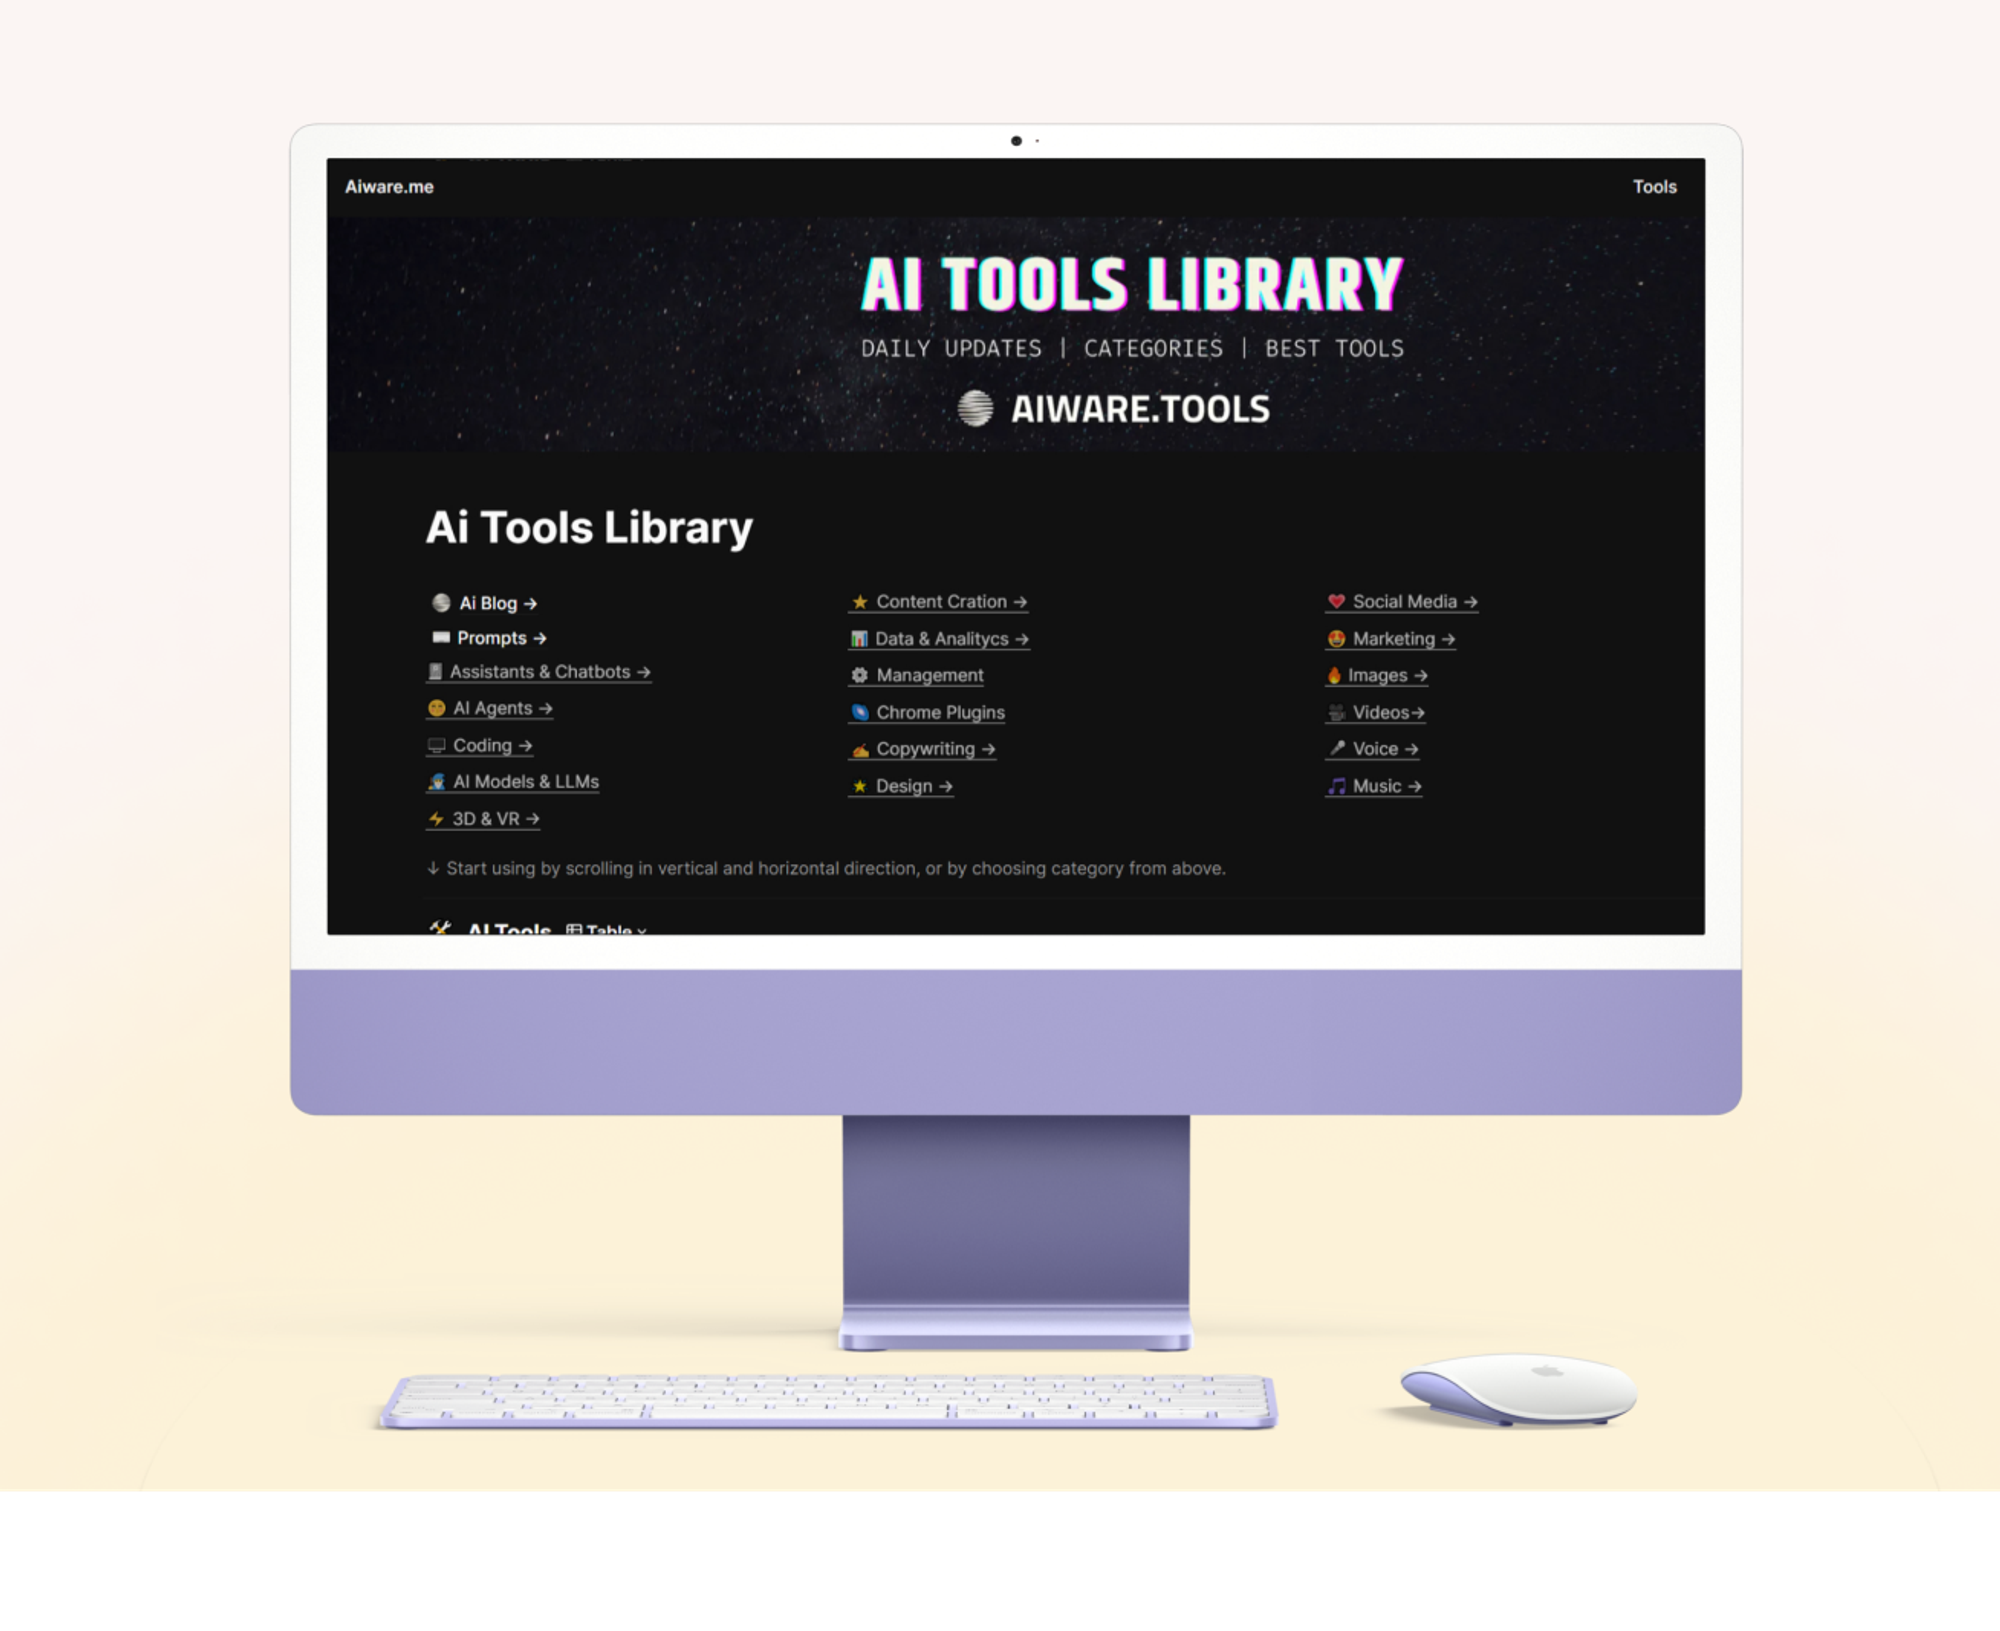 Tools added to Aiware Tools Library